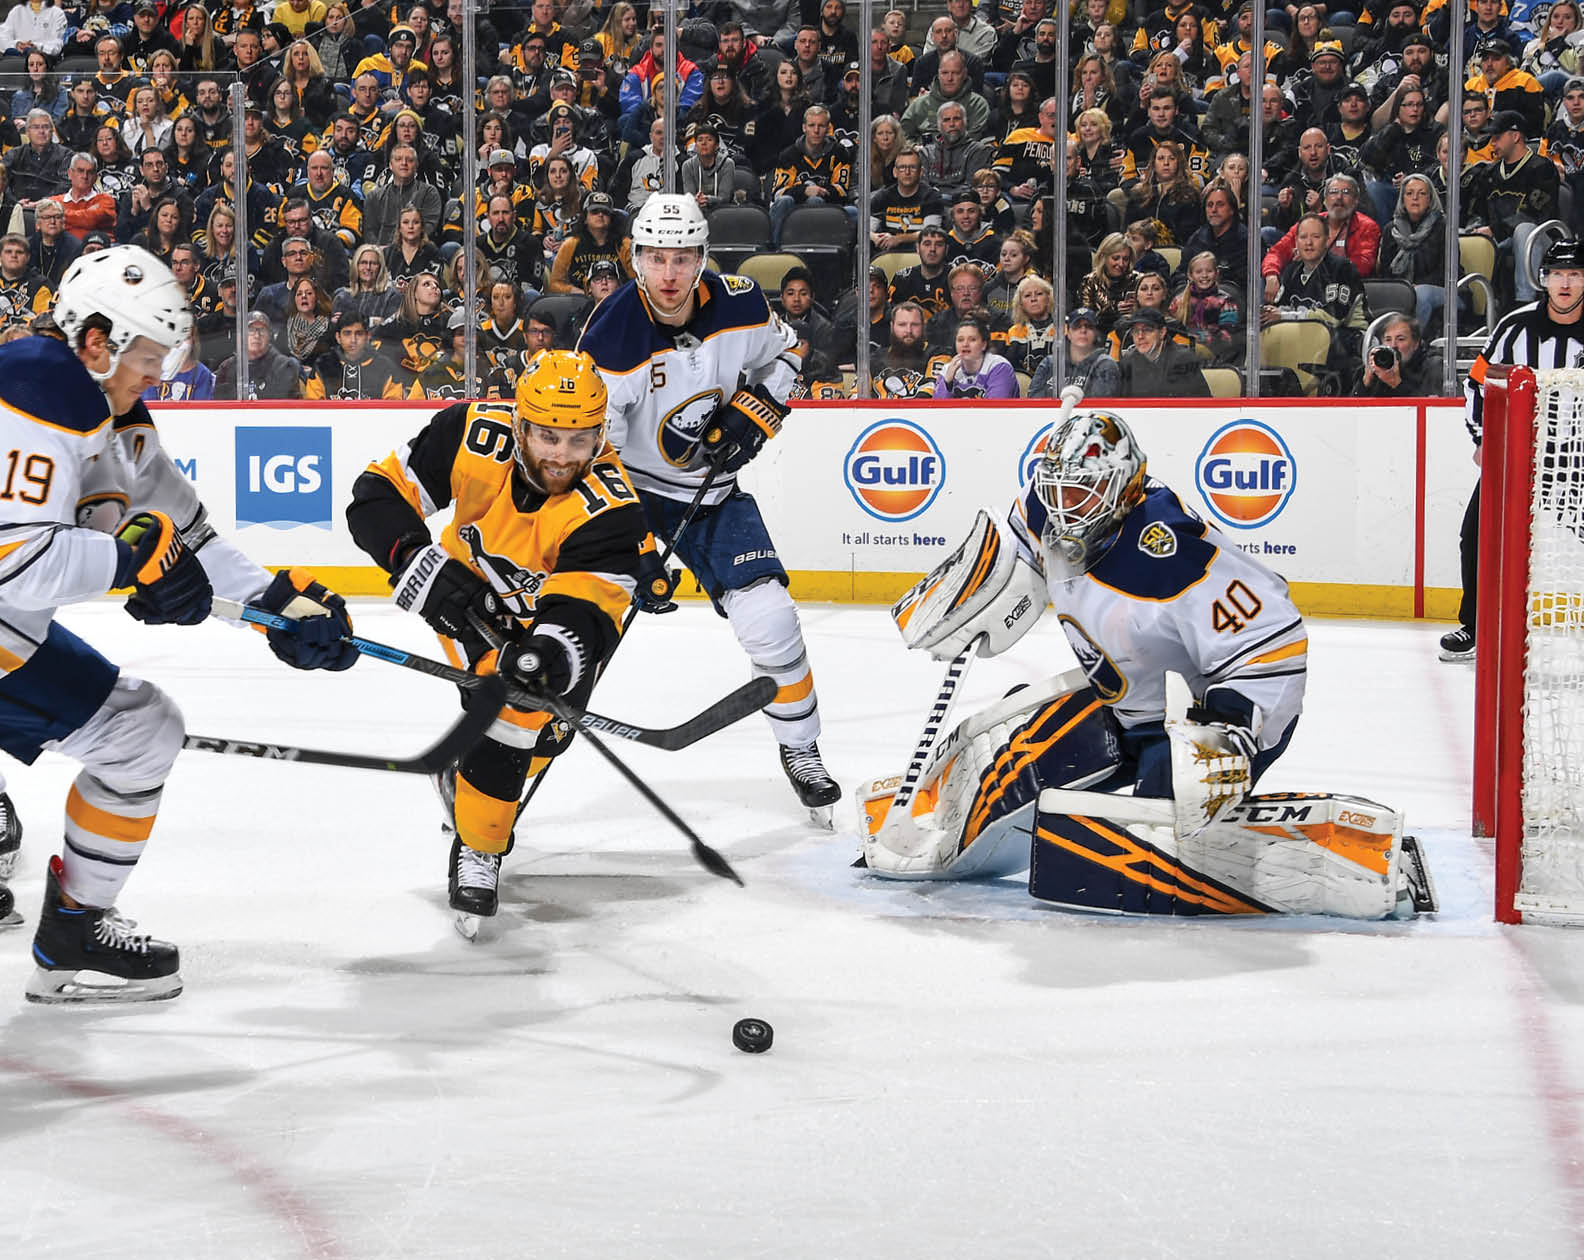 February 22, 2020 - Pittsburgh Penguins vs Buffalo Sabres at PPG Paints Arena  Buffalo won the game 5-2 